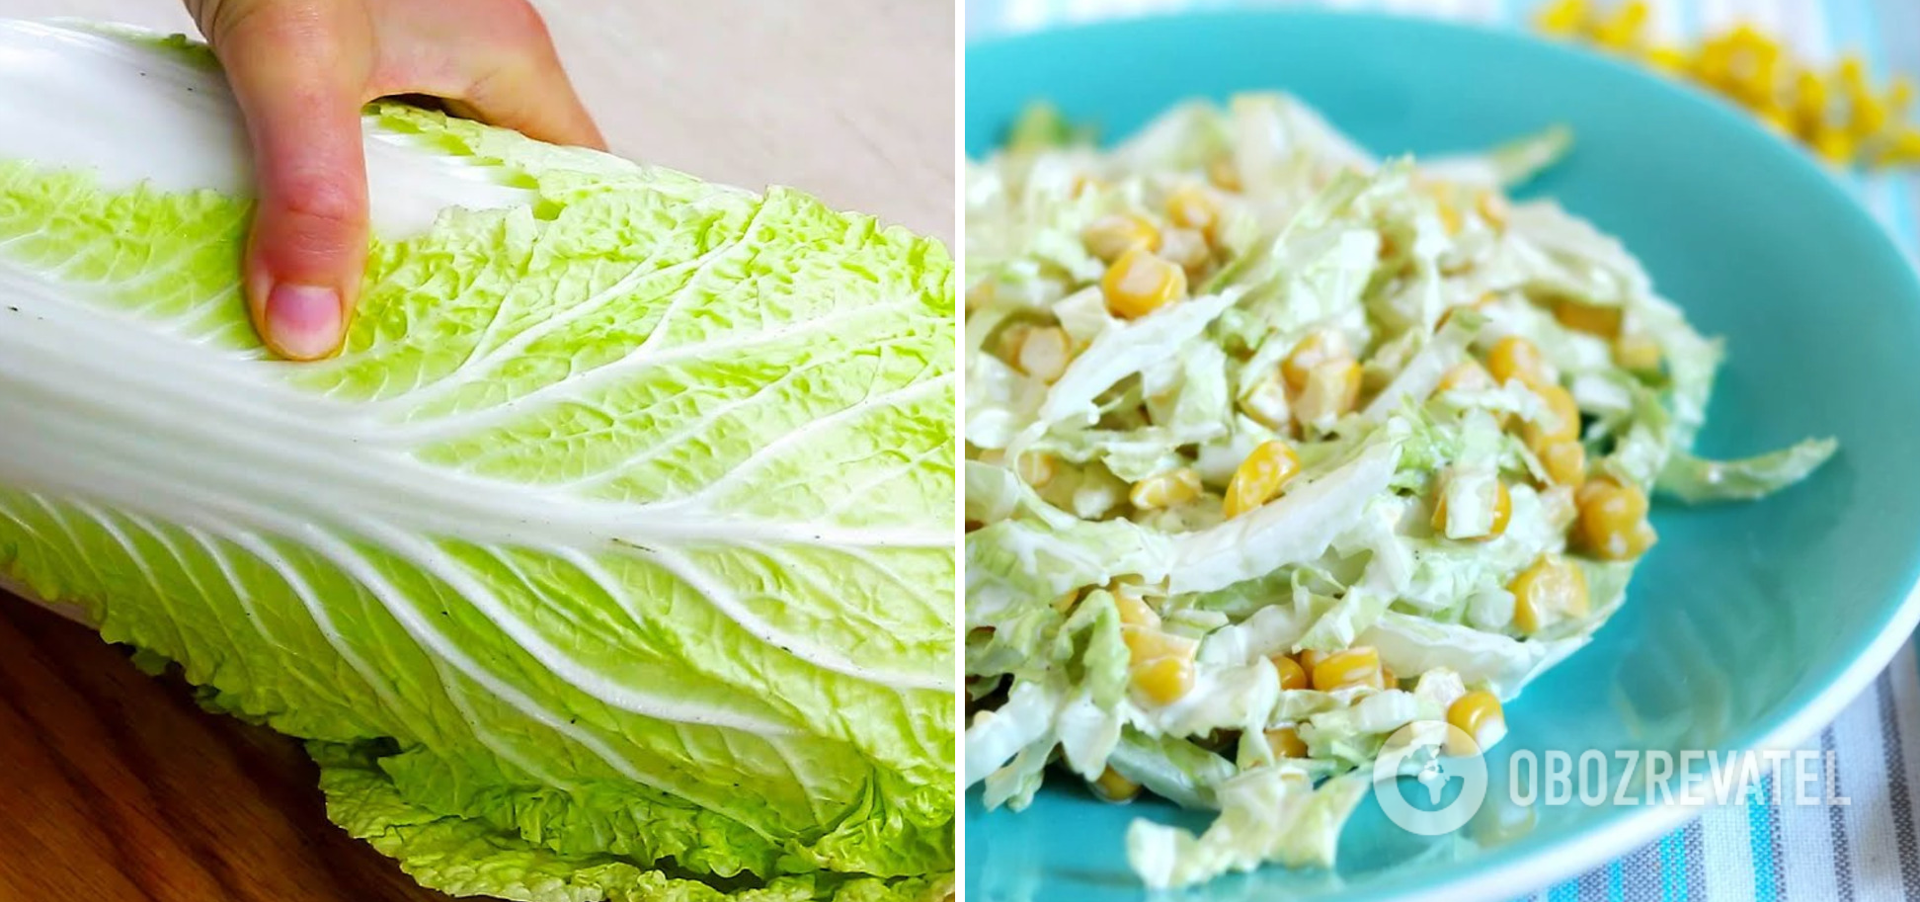 What kind of salad to cook from napa cabbage